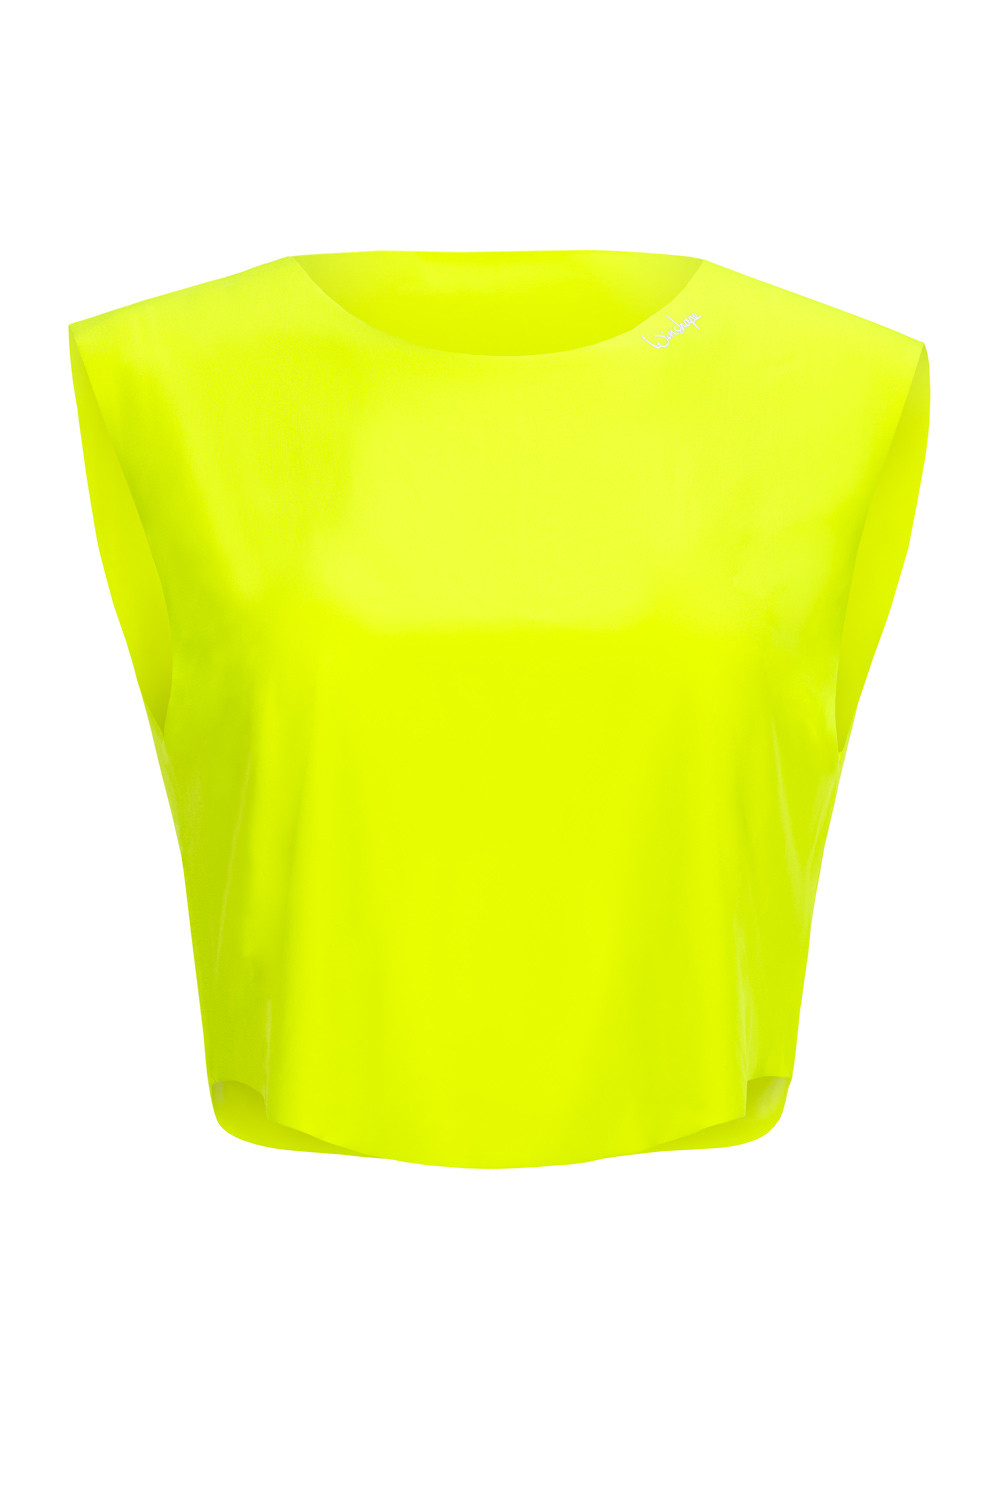 Functional Light Cropped Top AET115, gelb, neon Style Winshape All-Fit